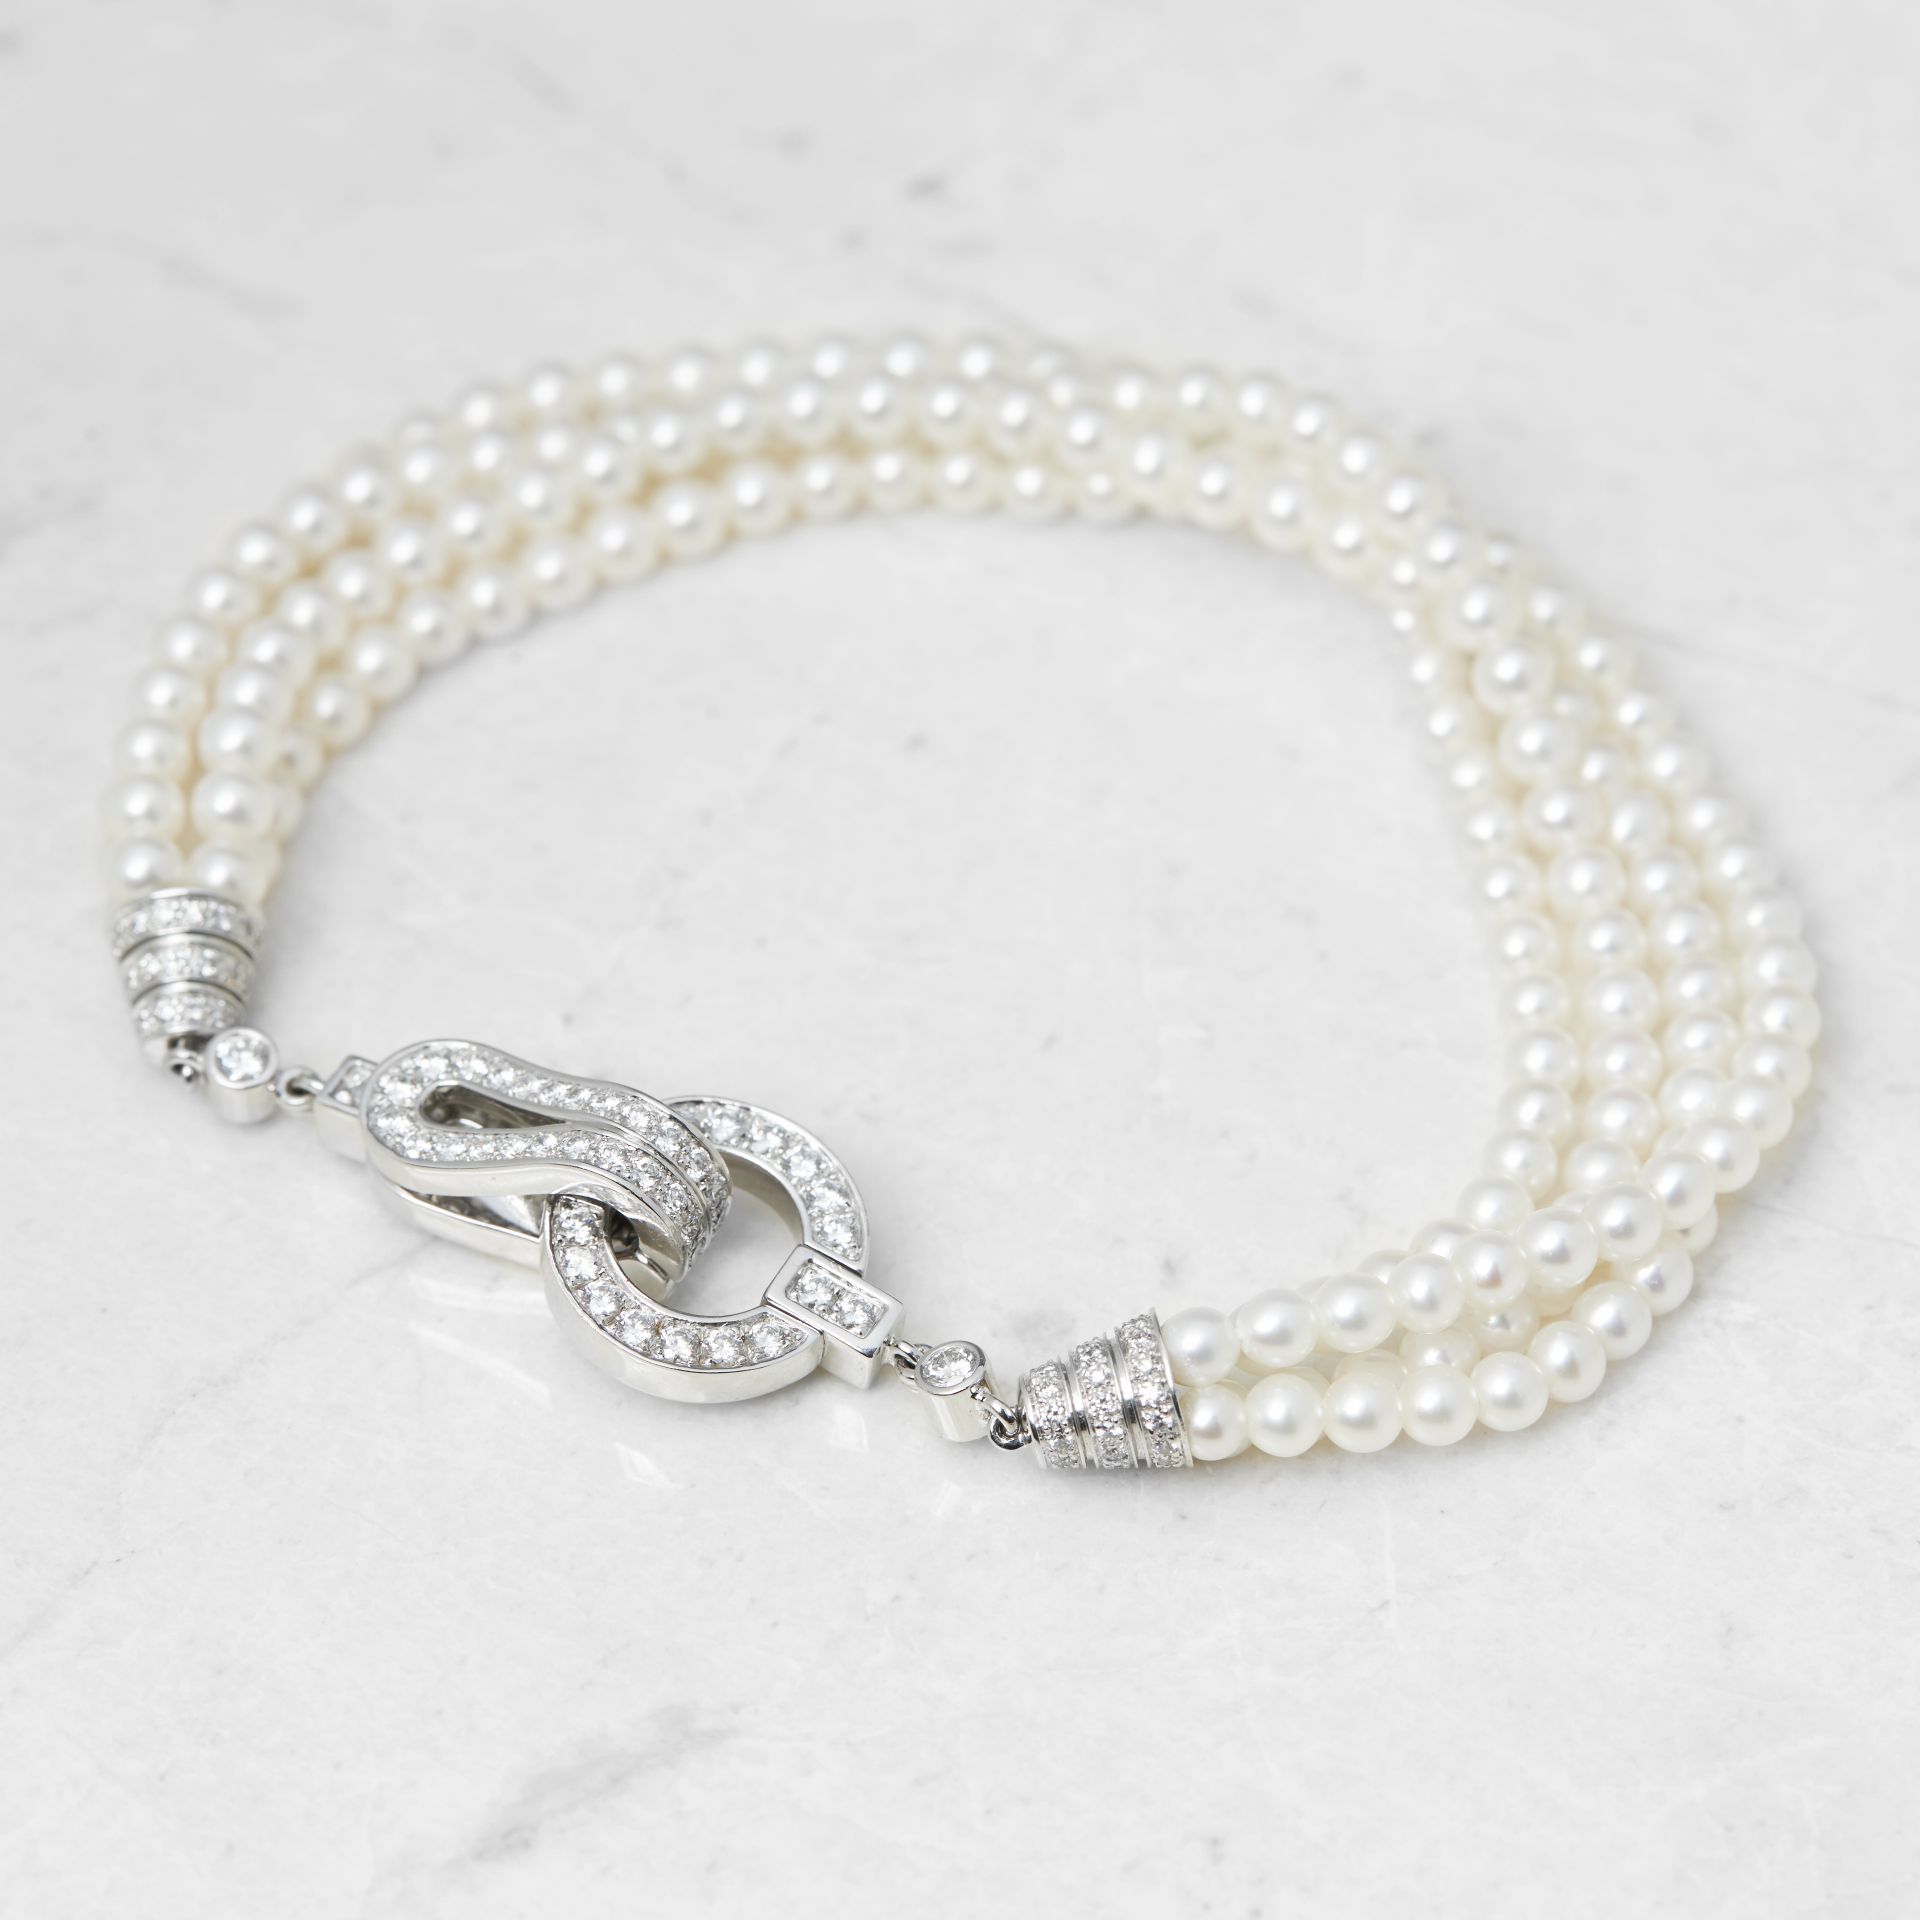 Cartier 18k White Gold Cultured Pearl & 1.02ct Diamond Agrafe Bracelet - Image 2 of 7